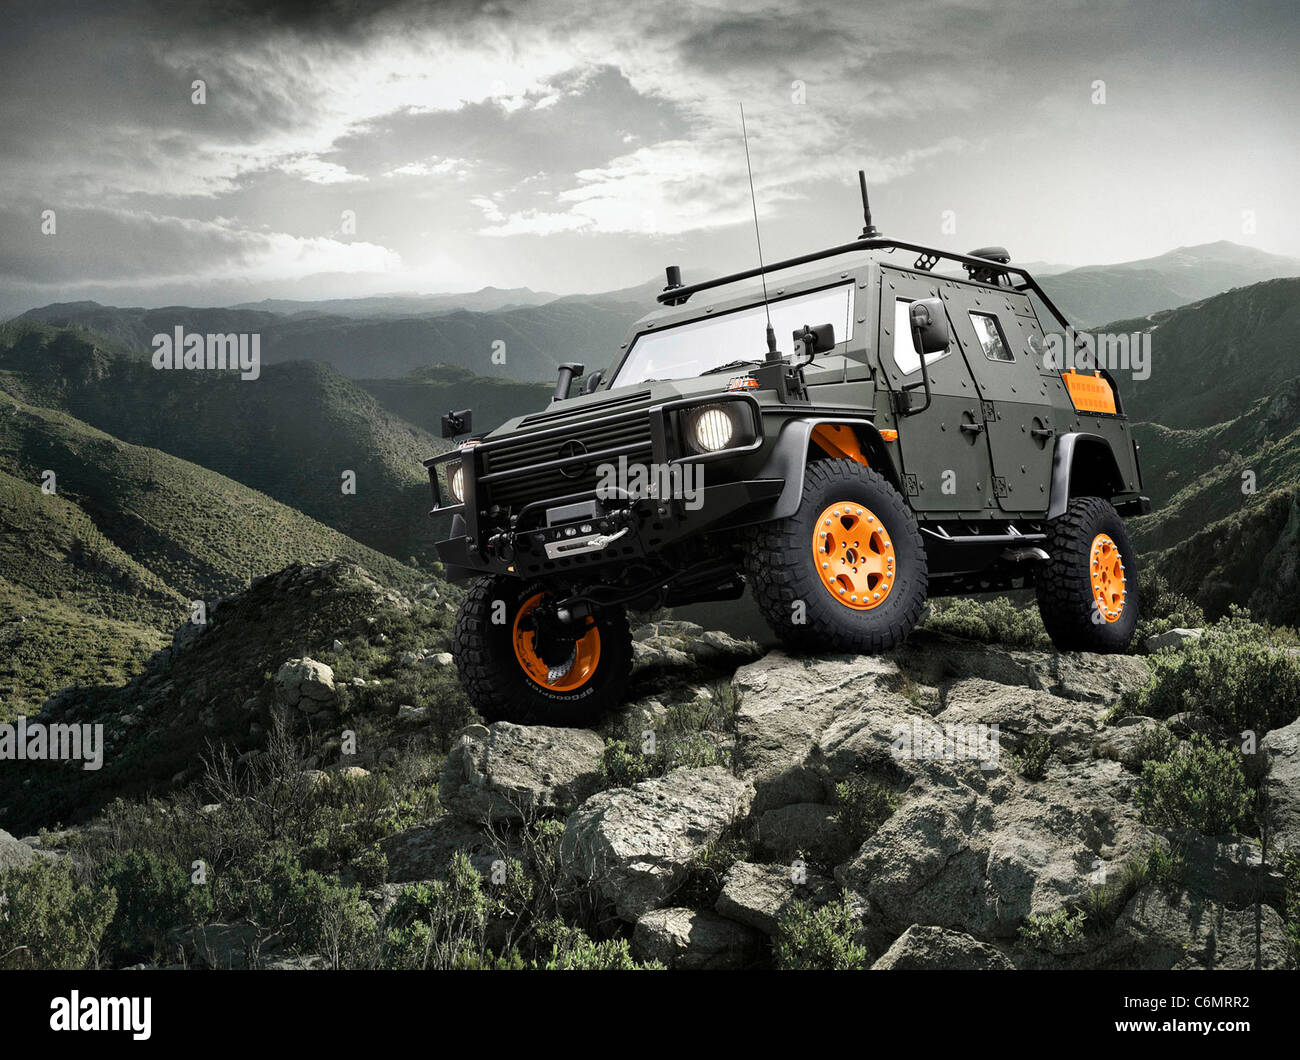 Mercedes-Benz unveils snazzy new armoured patrol vehicle Mercedes-Benz has teamed with EADS to offer one of the coolest looking Stock Photo